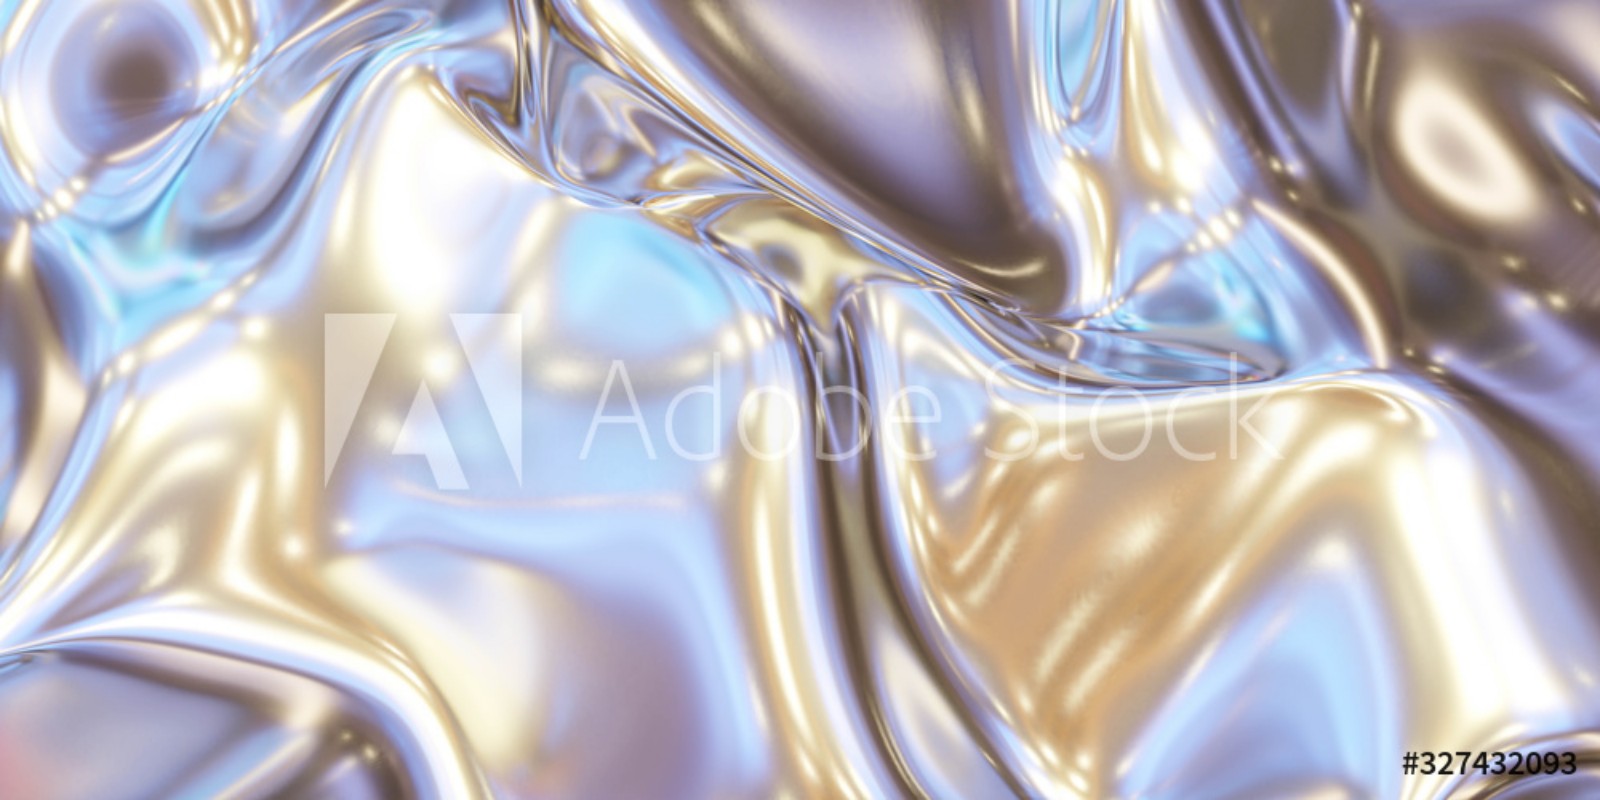 Image de Glossy silver metal fluid glossy chrome mirror water effect background backdrop texture 3d render illustration